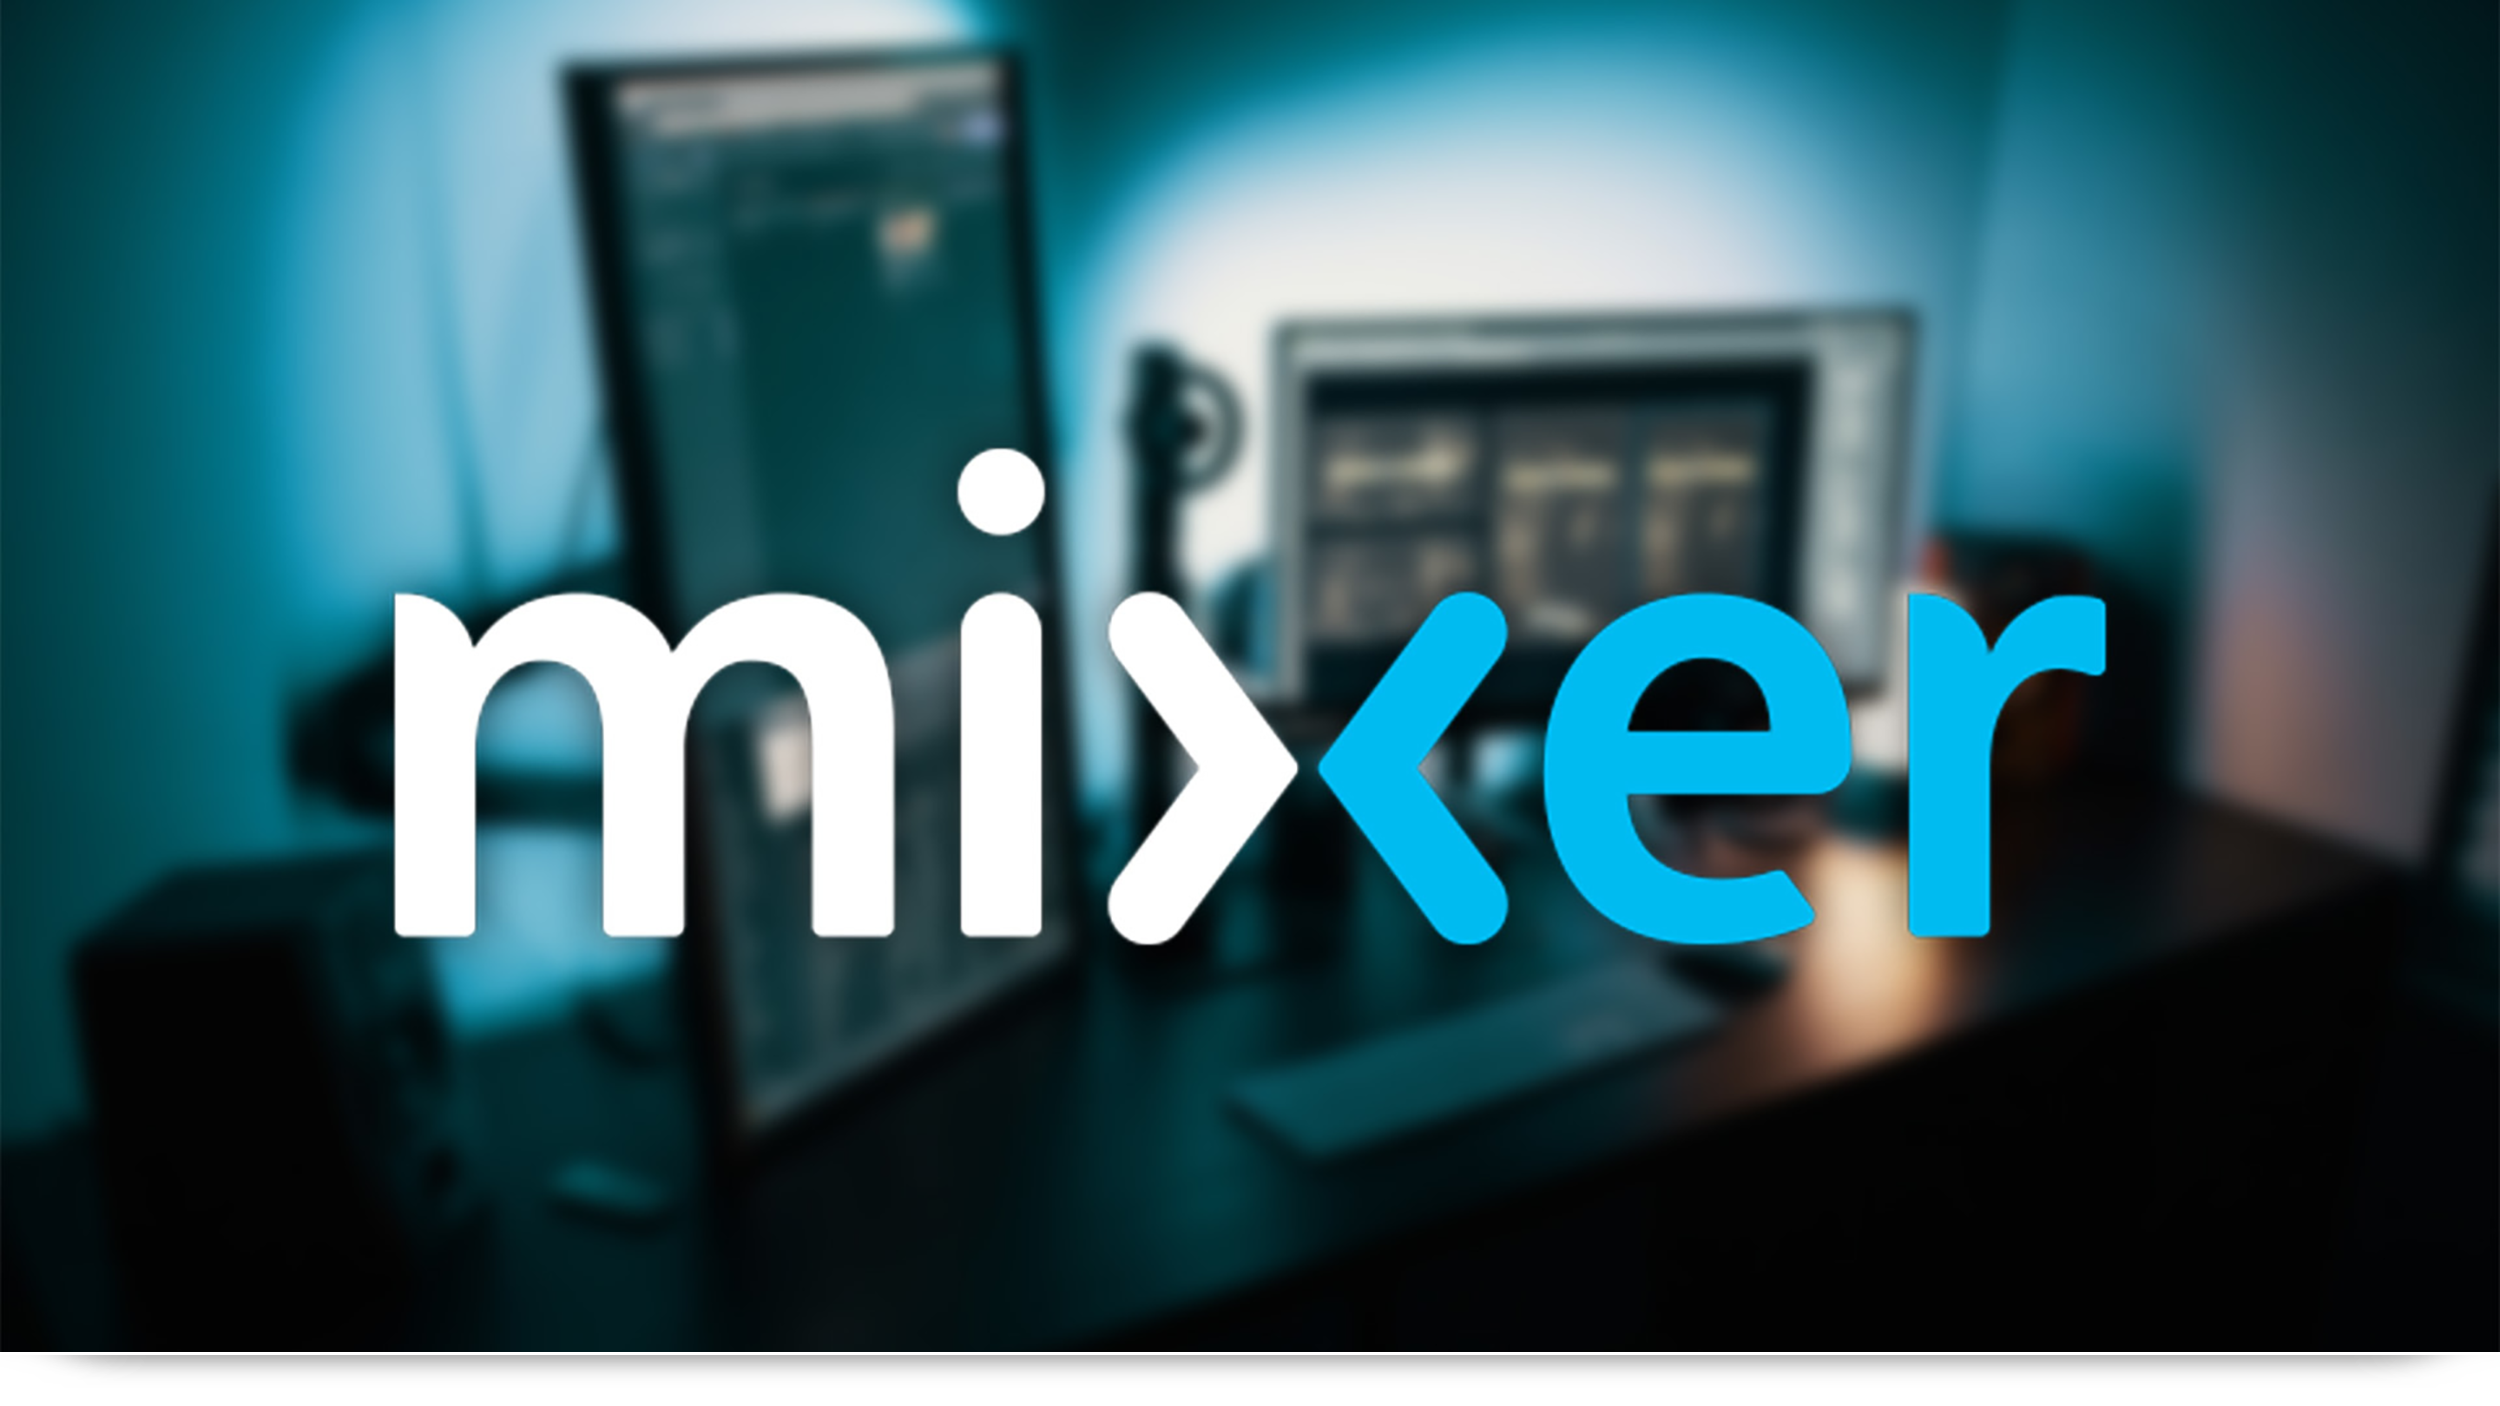 Why Microsoft Shut Down Mixer and Teamed Up with Facebook | by Antony  Terence | SUPERJUMP | Medium